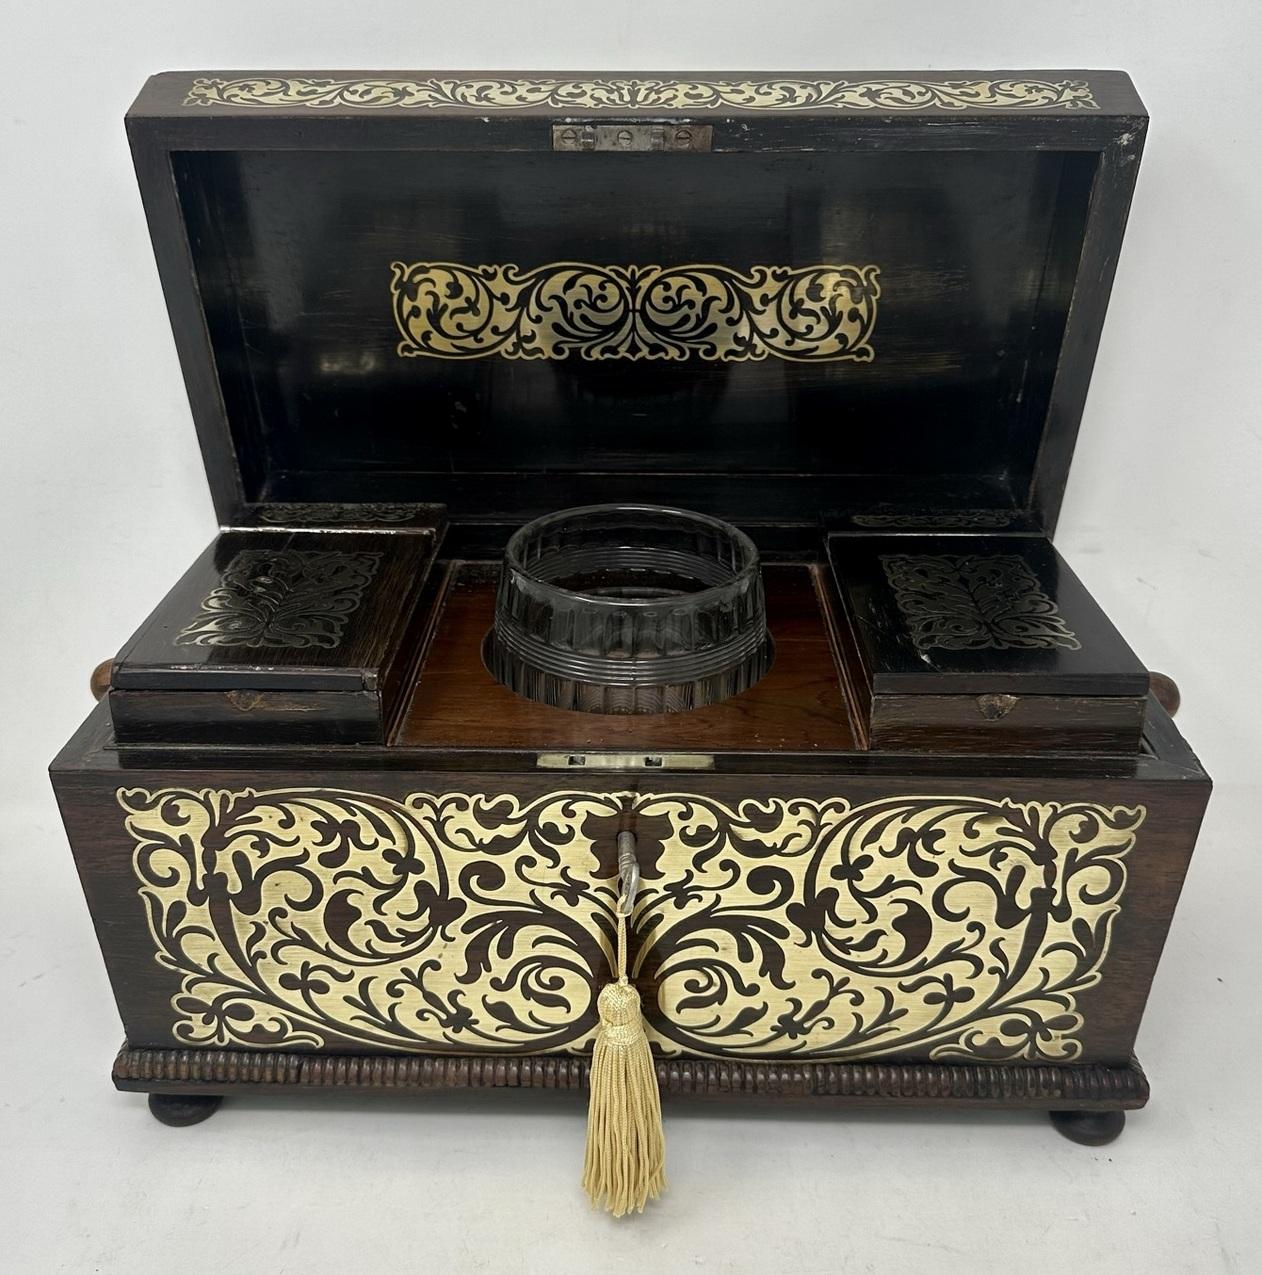 Antique Brass Inlaid Mahogany English Tea Caddy Box Regency Gillows Lancaster In Good Condition For Sale In Dublin, Ireland